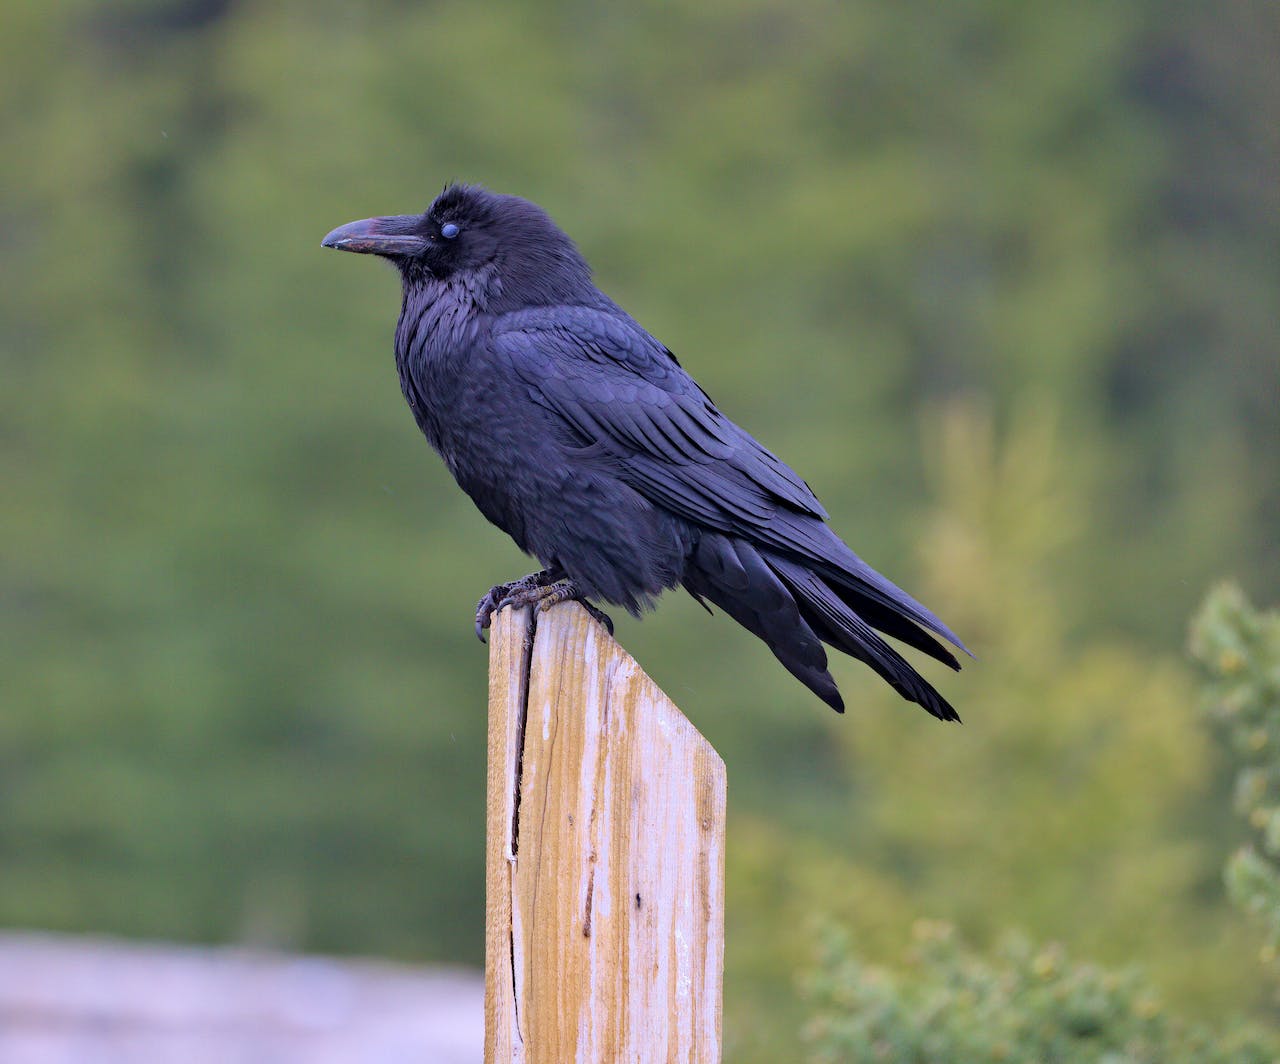 Raven Sitting on a Wooden Pole